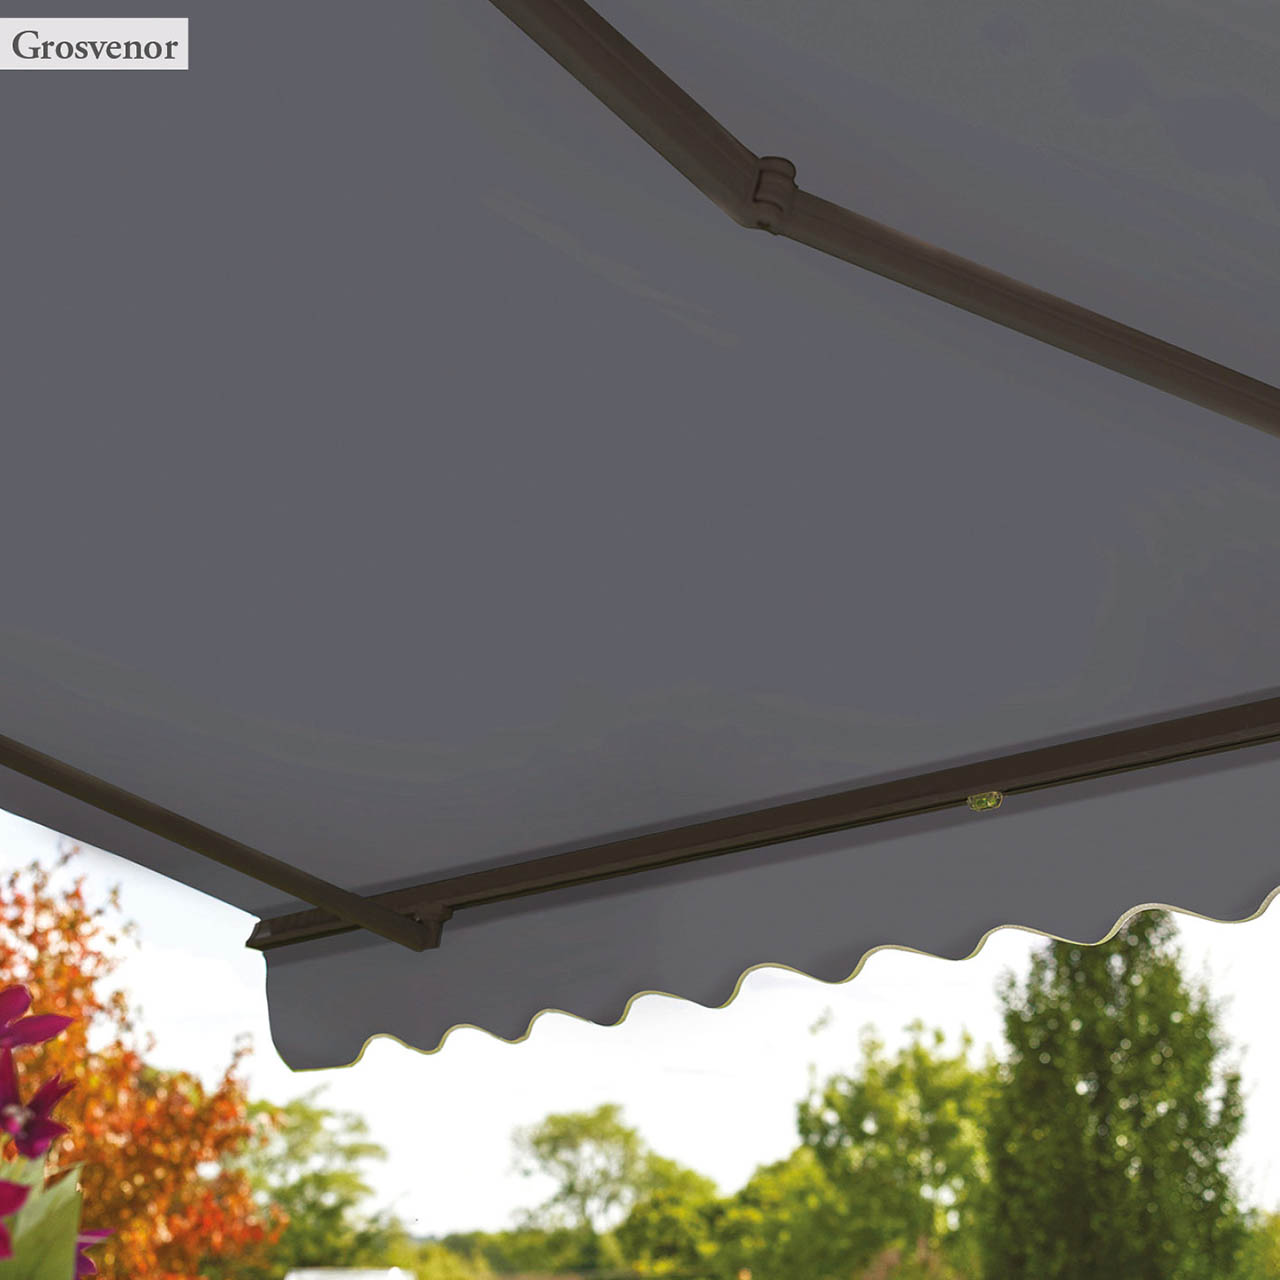 Deluxe Striped Easy Fit Cafe Awnings